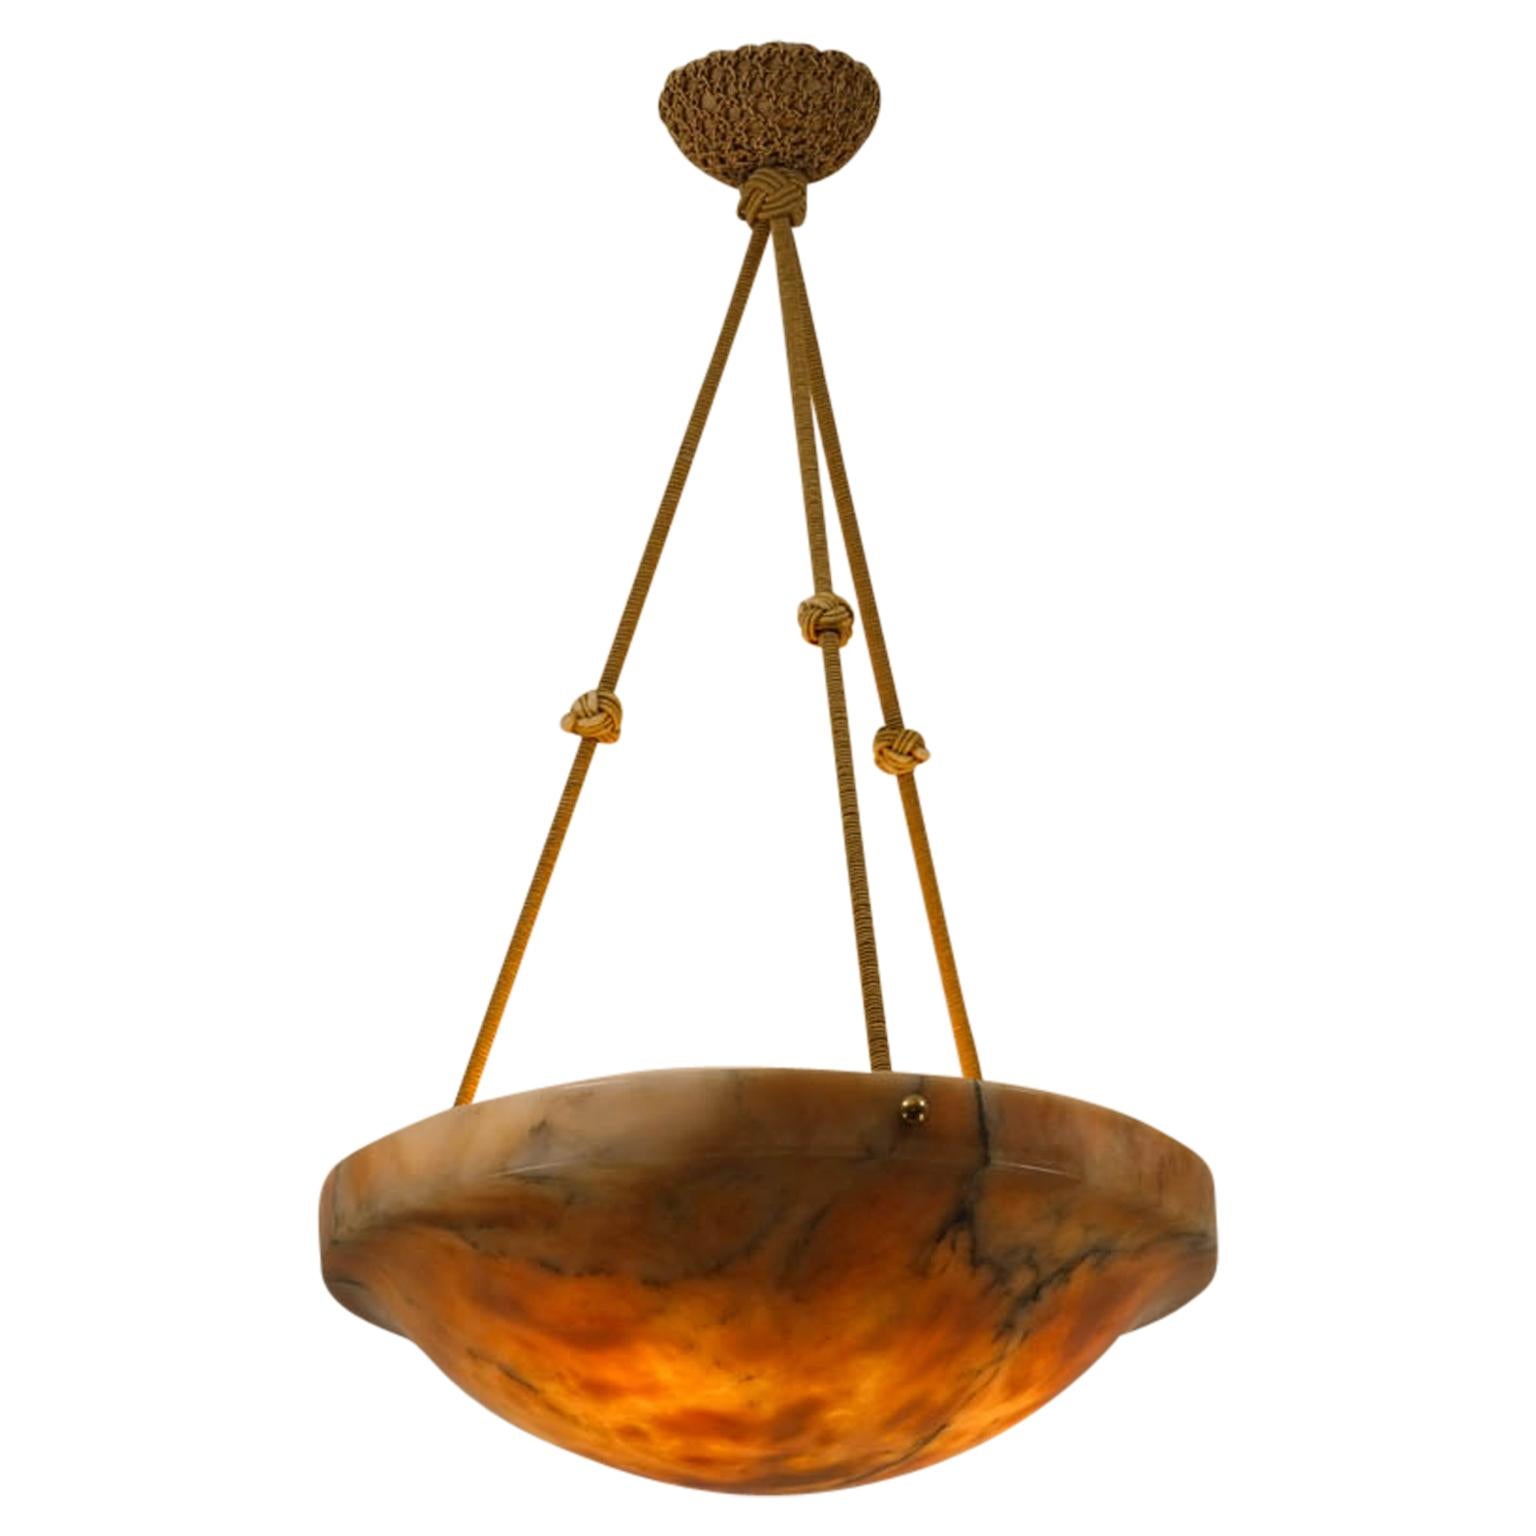 With a confident upper rim, this carved shade diffuses light through an elegant bowl. Perfectly proportioned.